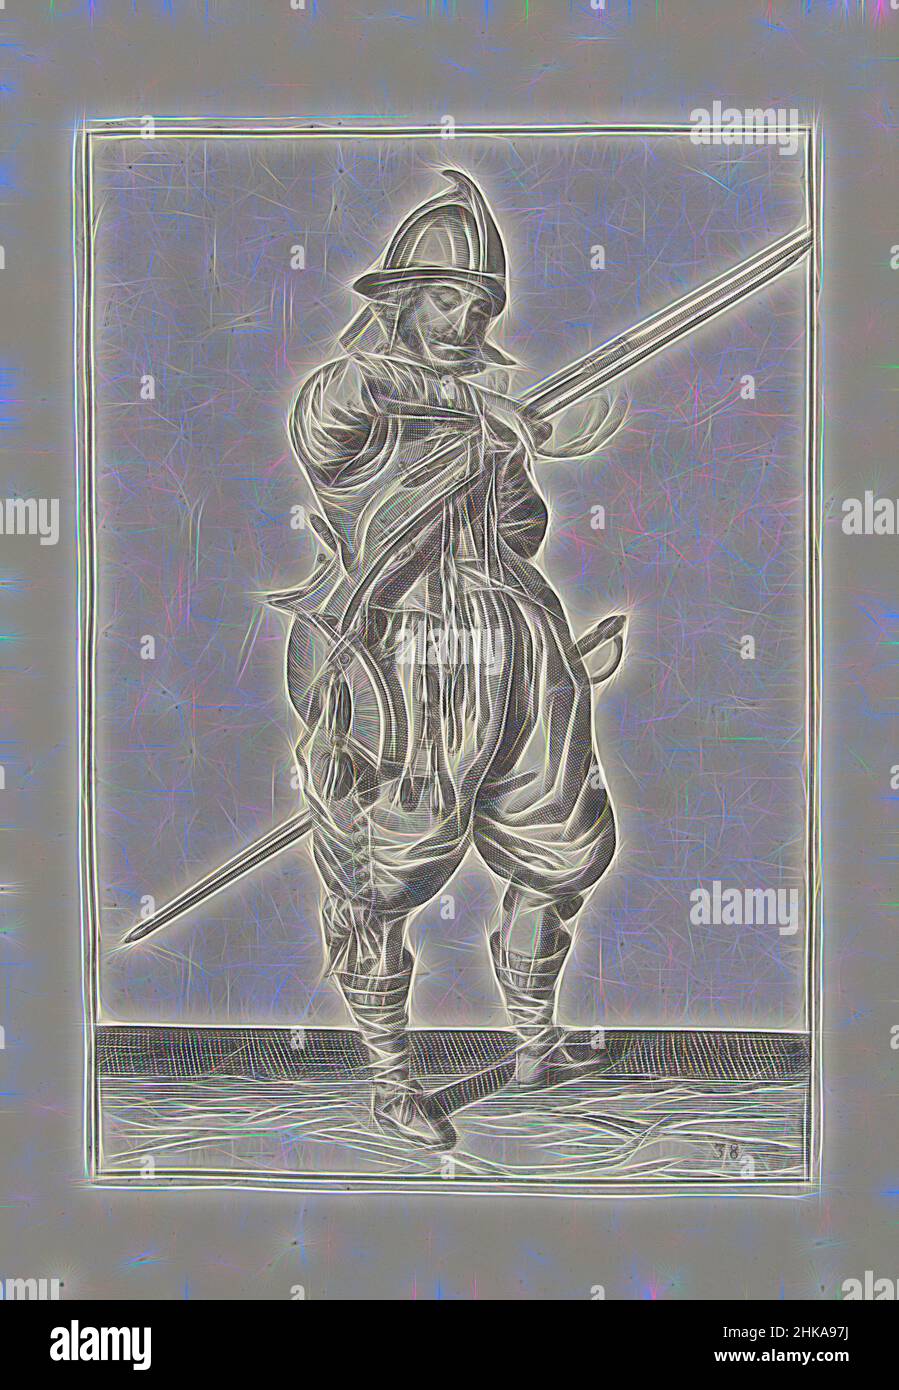 Inspired by Soldier on guard with a rudder grabbing his fuse (no. 38), c. 1600, A soldier on guard, full-length, to the right, holding a rudder (a particular type of firearm) with his left hand. In his left hand, in addition to the rudder, there is a burning fuse (no. 38), c. 1600. With his right, Reimagined by Artotop. Classic art reinvented with a modern twist. Design of warm cheerful glowing of brightness and light ray radiance. Photography inspired by surrealism and futurism, embracing dynamic energy of modern technology, movement, speed and revolutionize culture Stock Photo